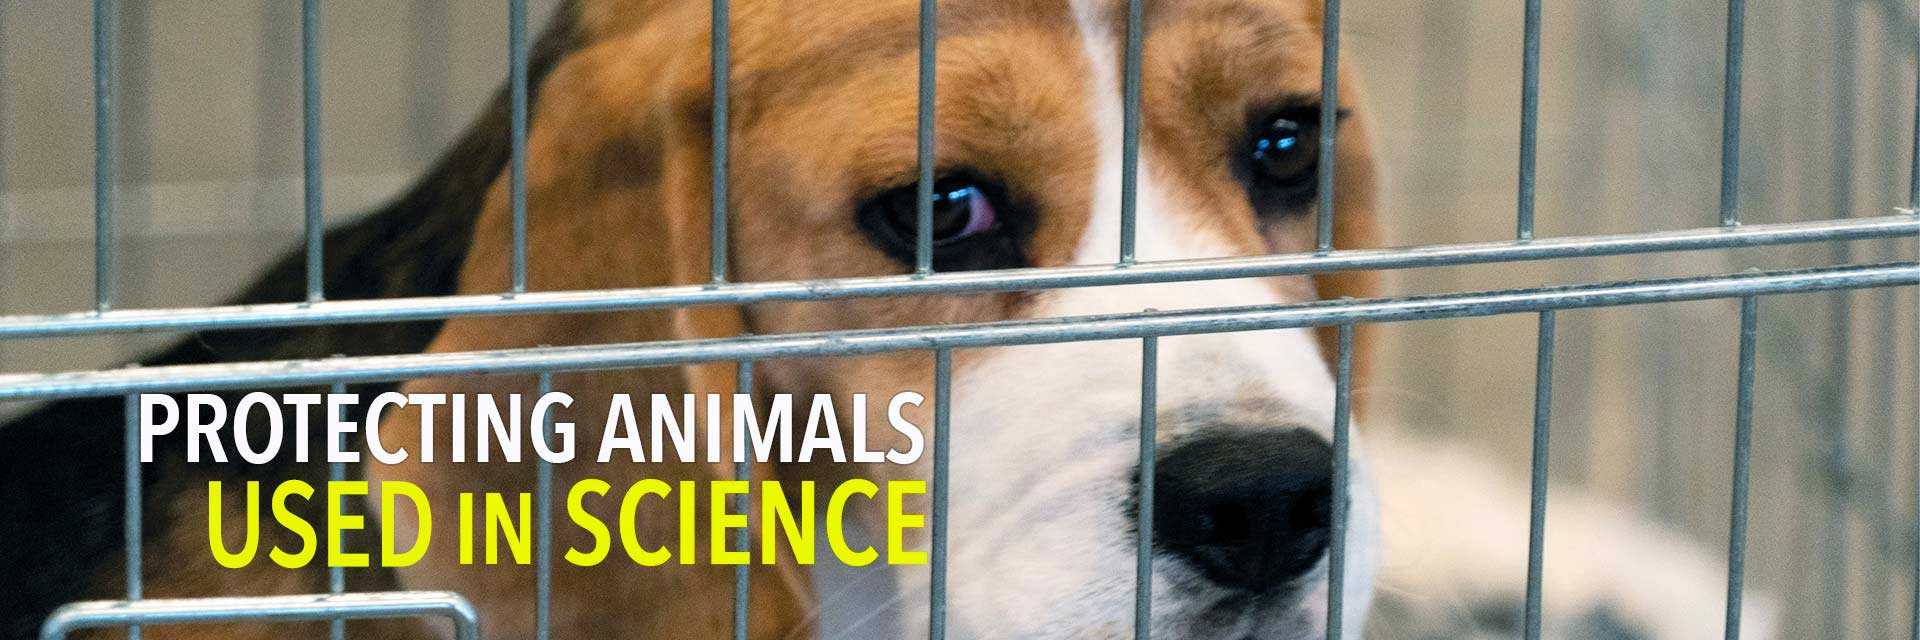 Protecting Animals Used in Science